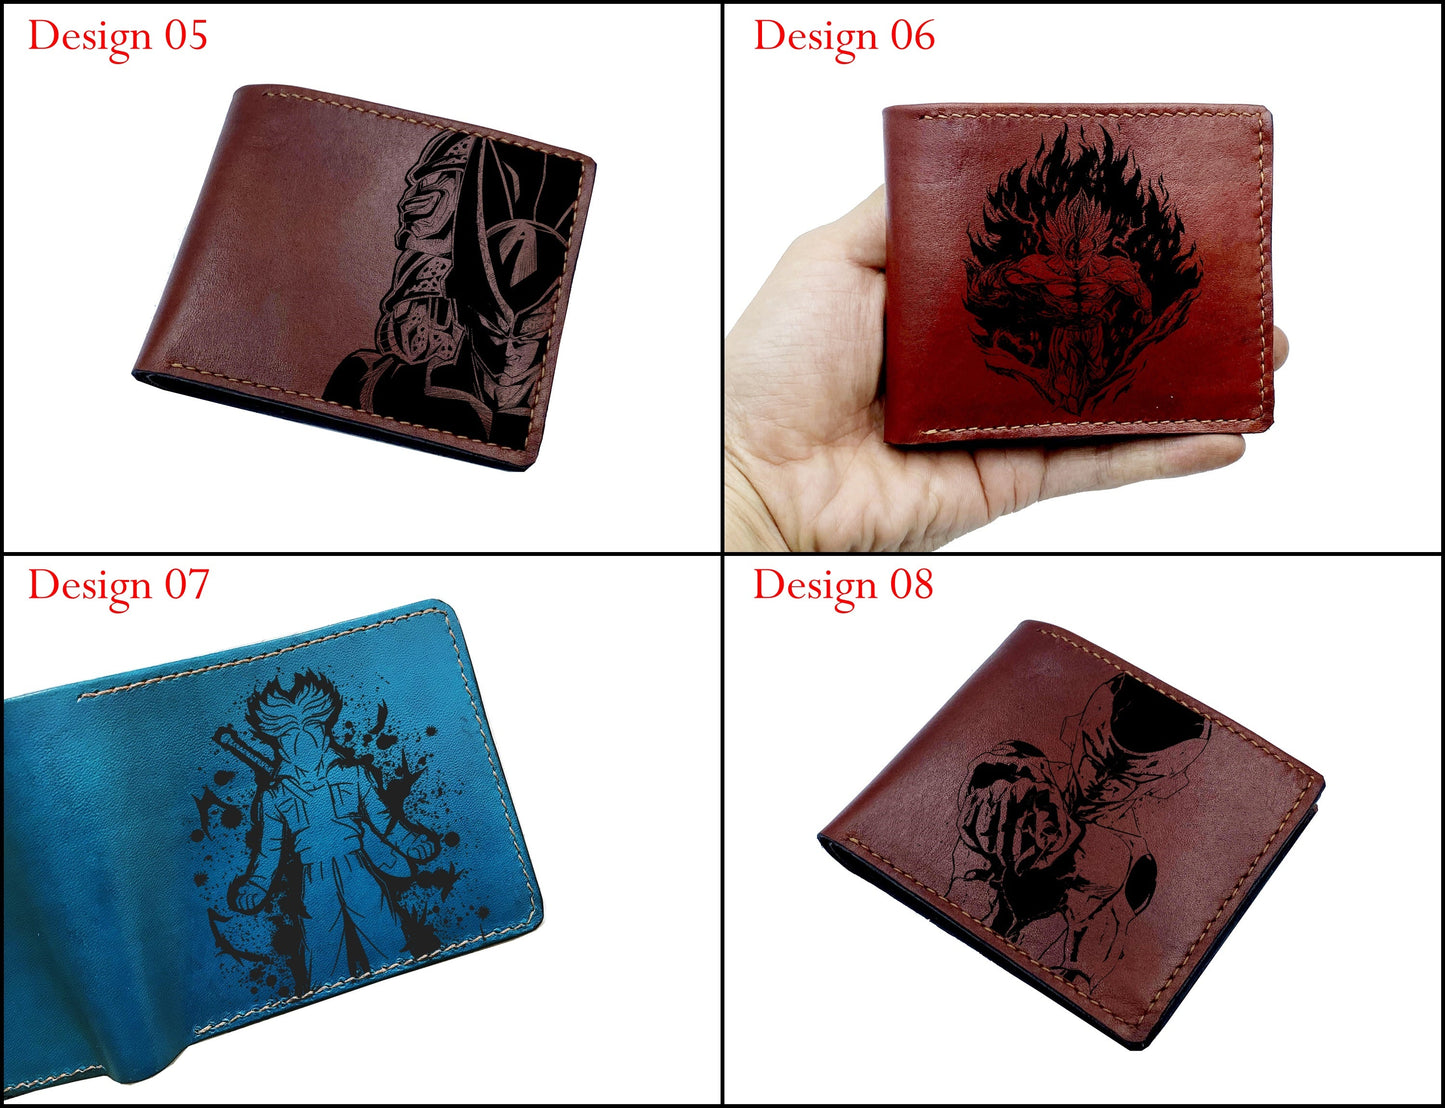 Mayan Corner - Personalized leather gift for brother, Trunks dragon ball super saiyan wallet, cool wallet for husband, boy